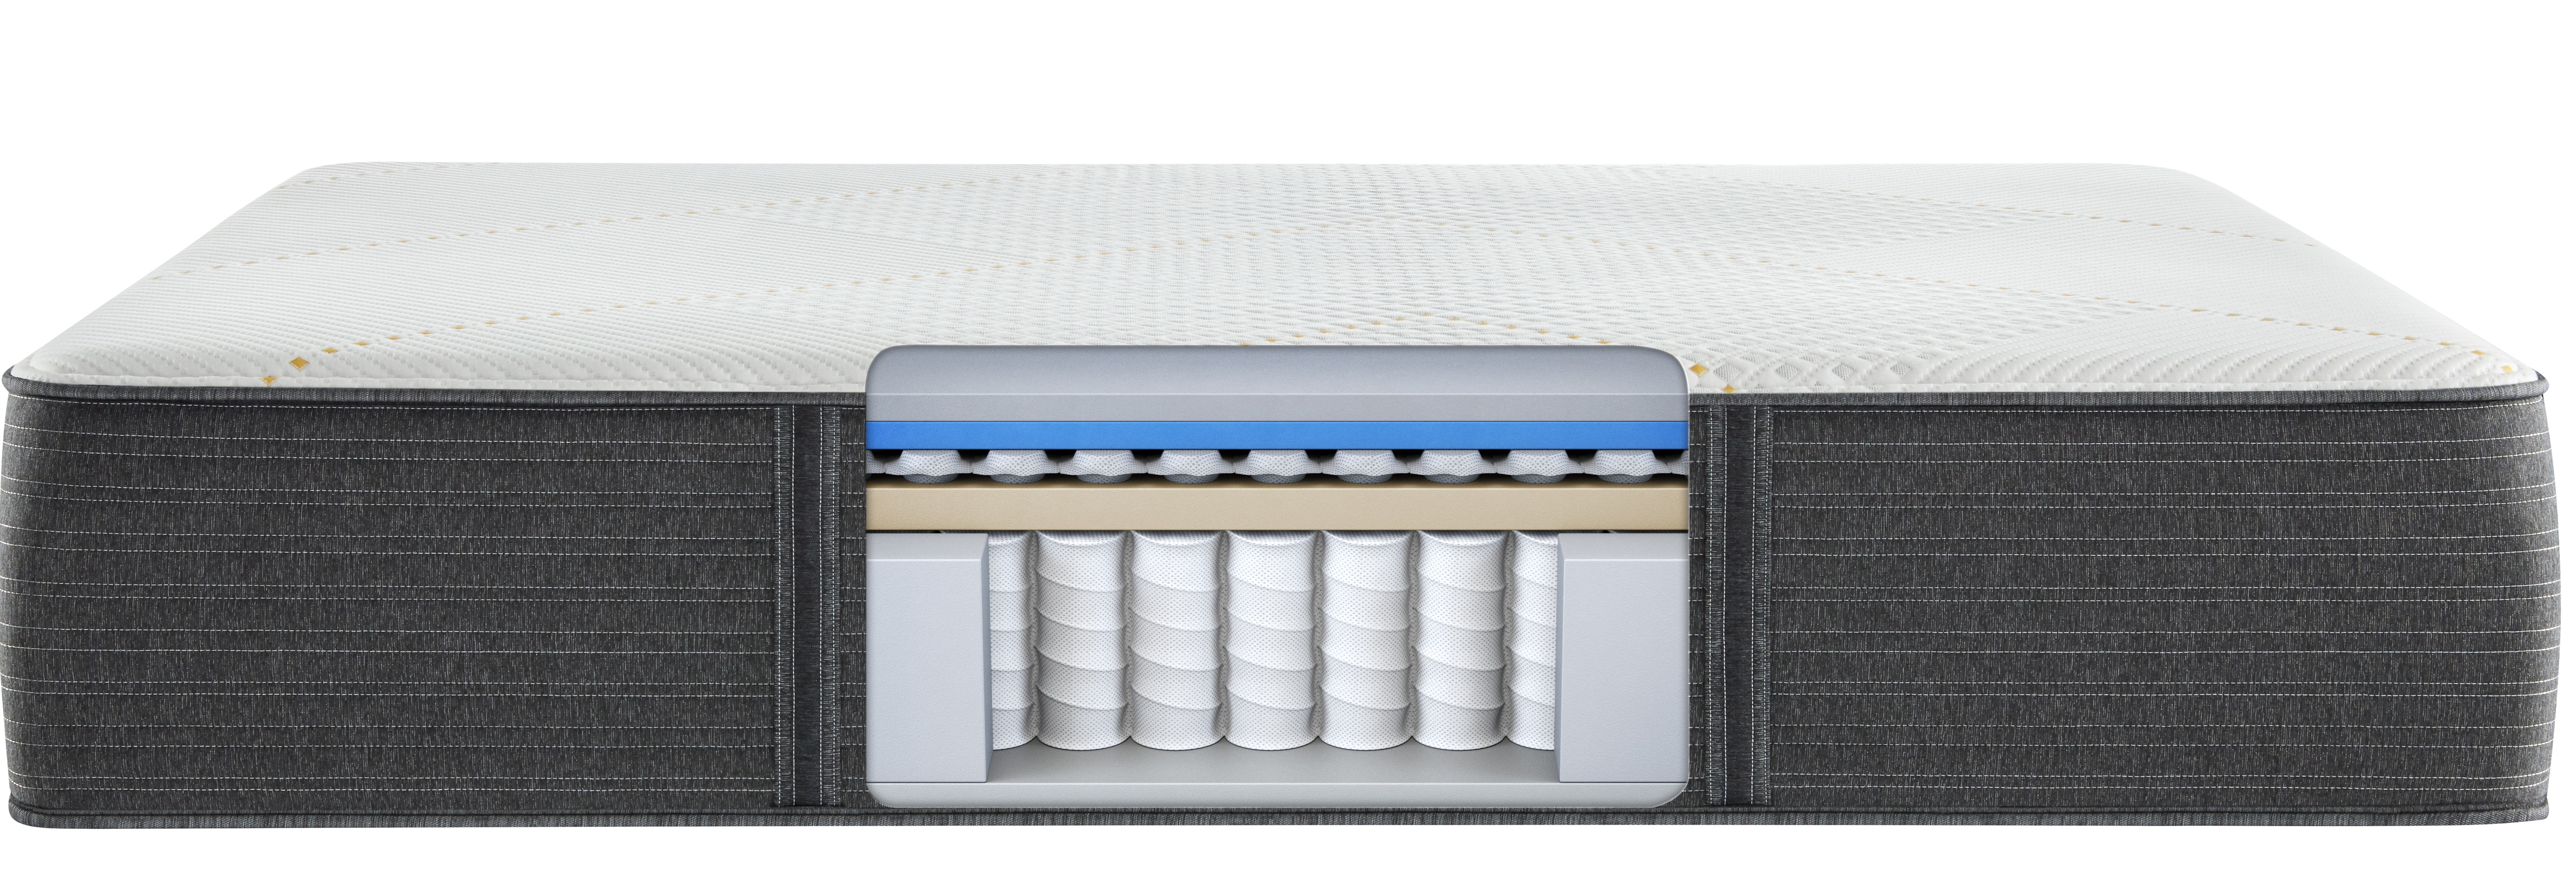 Graphic cutout showing innersprings and foam inside Beautyrest hybrid mattresses